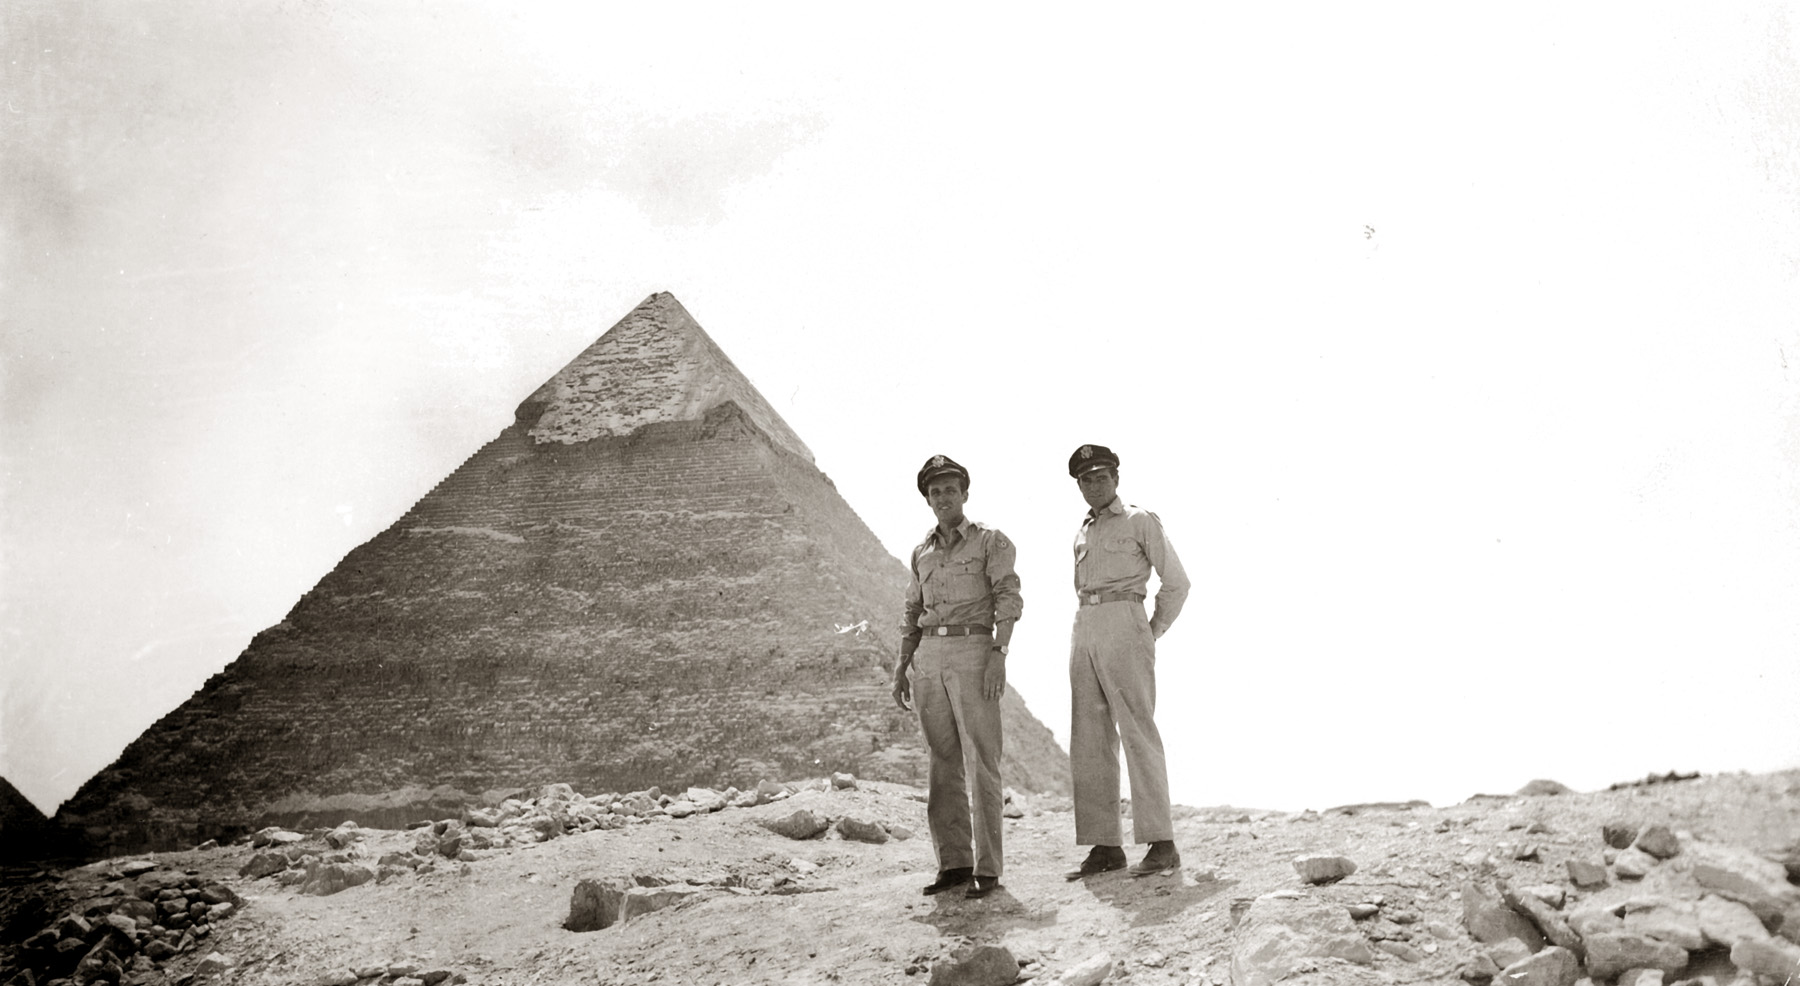 This is part of my ongoing quest to scan all the family photos that have come into my possession over the past few years. The interesting ones, at least. Here's my grandfather again, this time at the Pyramids in Egypt between late 1944 and late 1945. There's no note on the back of this print but he's clearly just being a tourist. View full size.